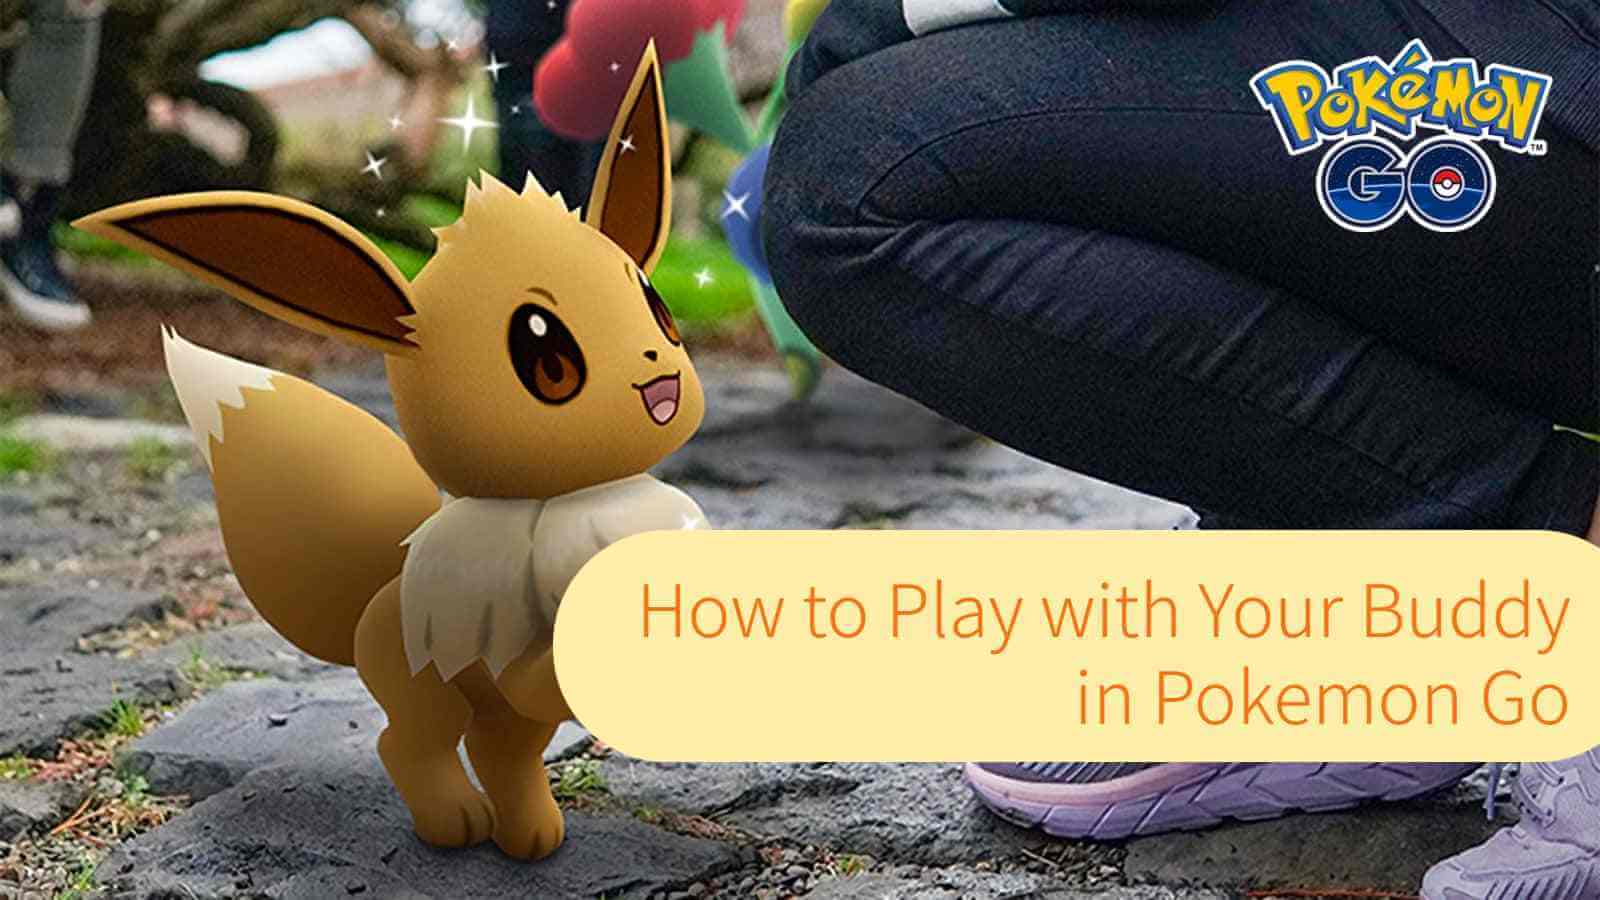 https://images.imyfone.com/en/assets/article/change-location/how-to-play-with-your-buddy-in-pokemon-go.jpg